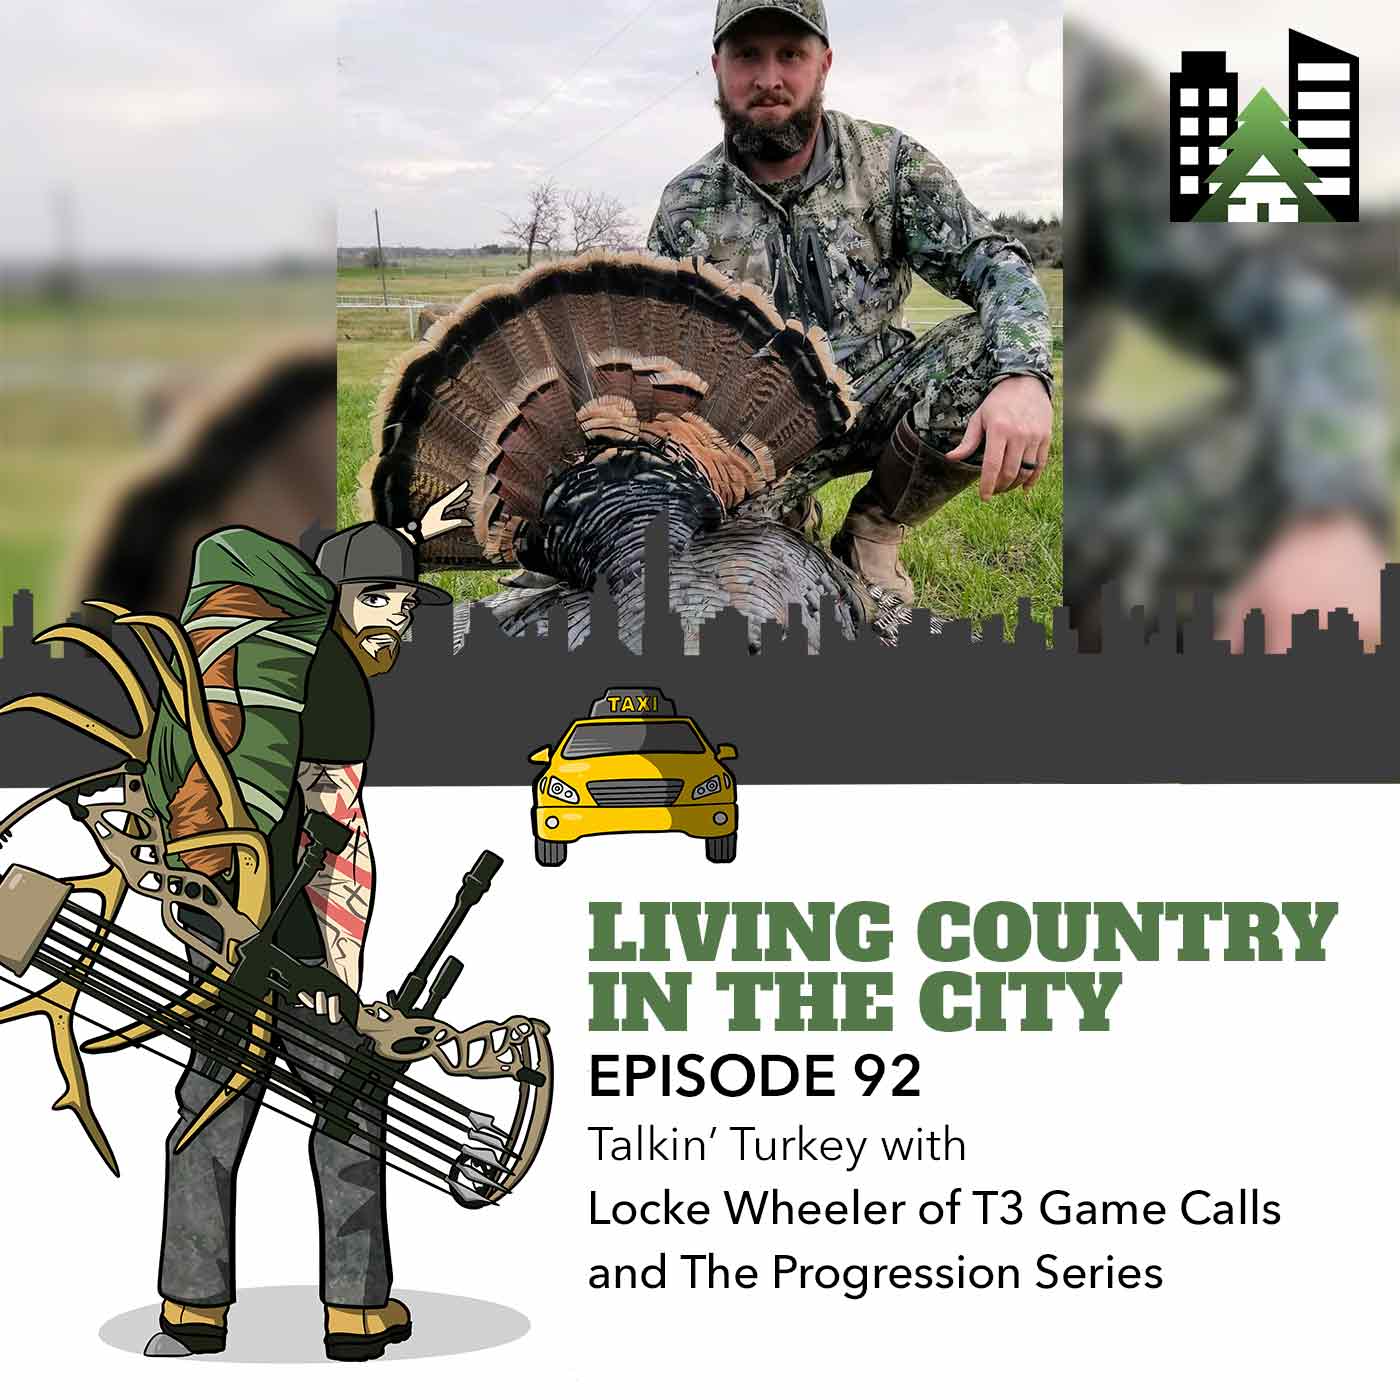 Ep 92 - Talkin’ Turkey with Locke Wheeler of T3 Game Calls and The Progression Series